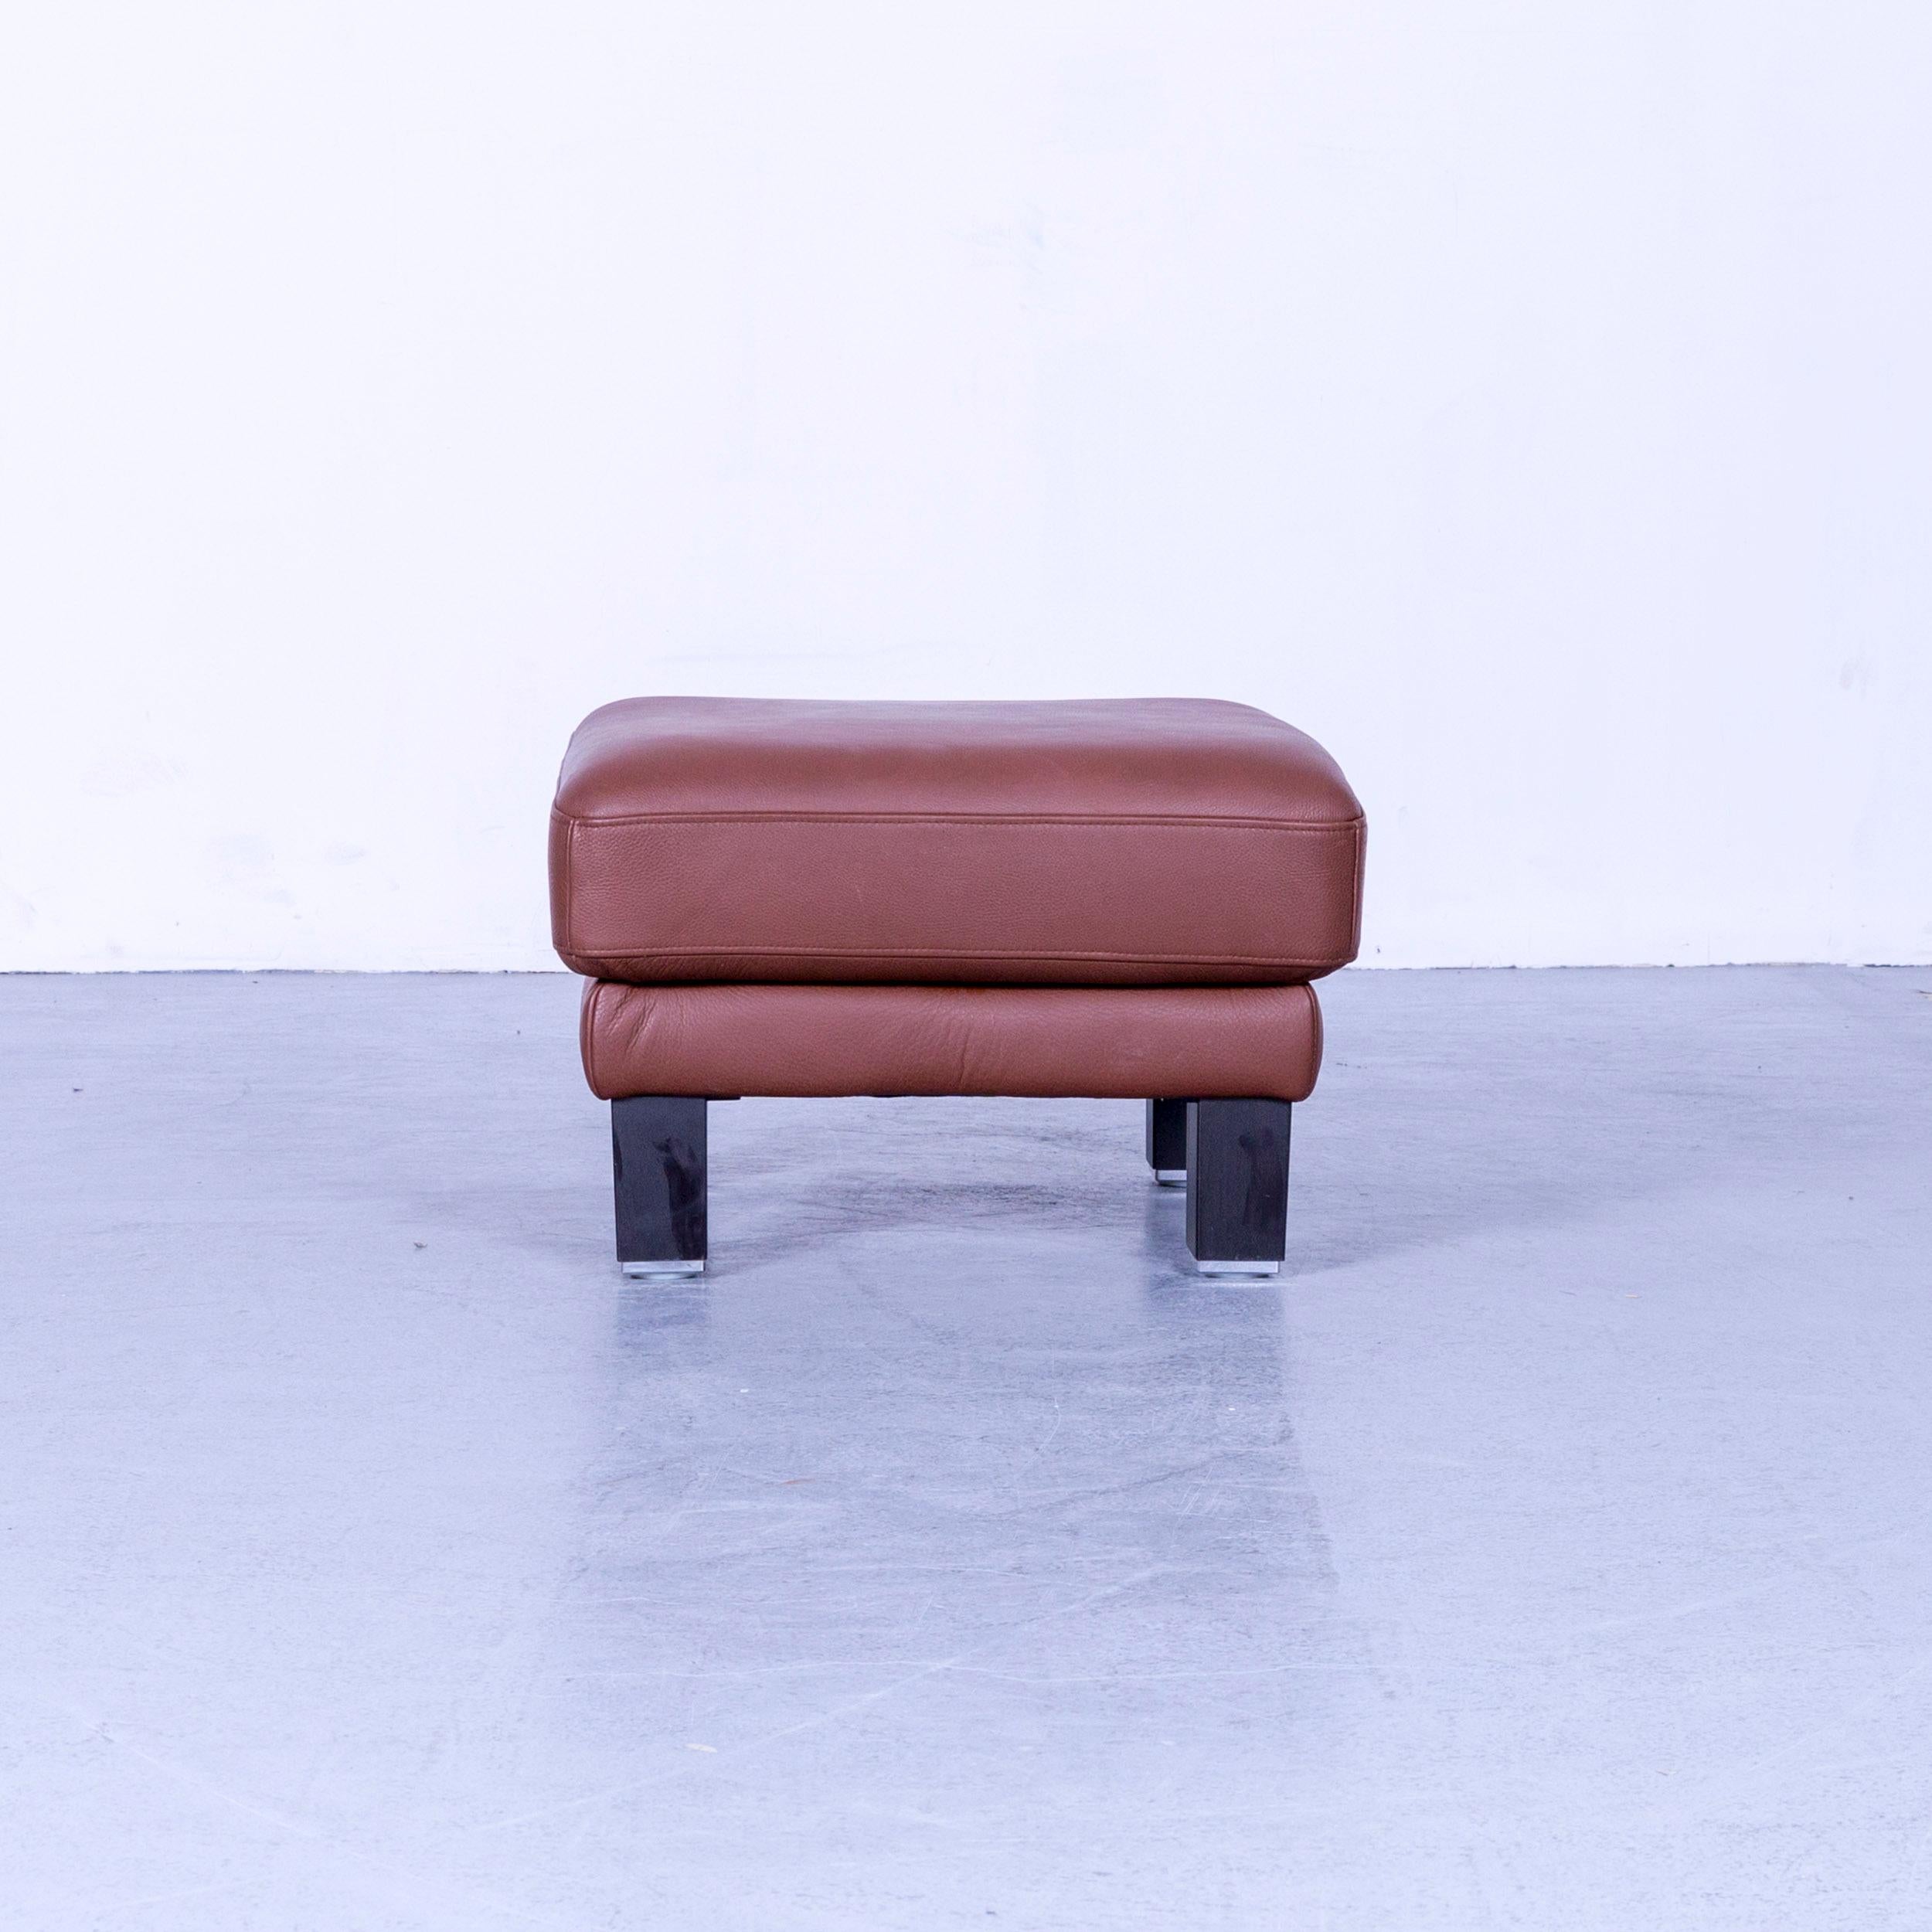 We bring to you a Rolf Benz Ego designer leather stool genuine leather.

Product measurements in centimeters:

Depth 60
Width 60
Height 40
Seat-height 
Rest-height 
Seat-depth 
Seat-width 
Back-height.

   